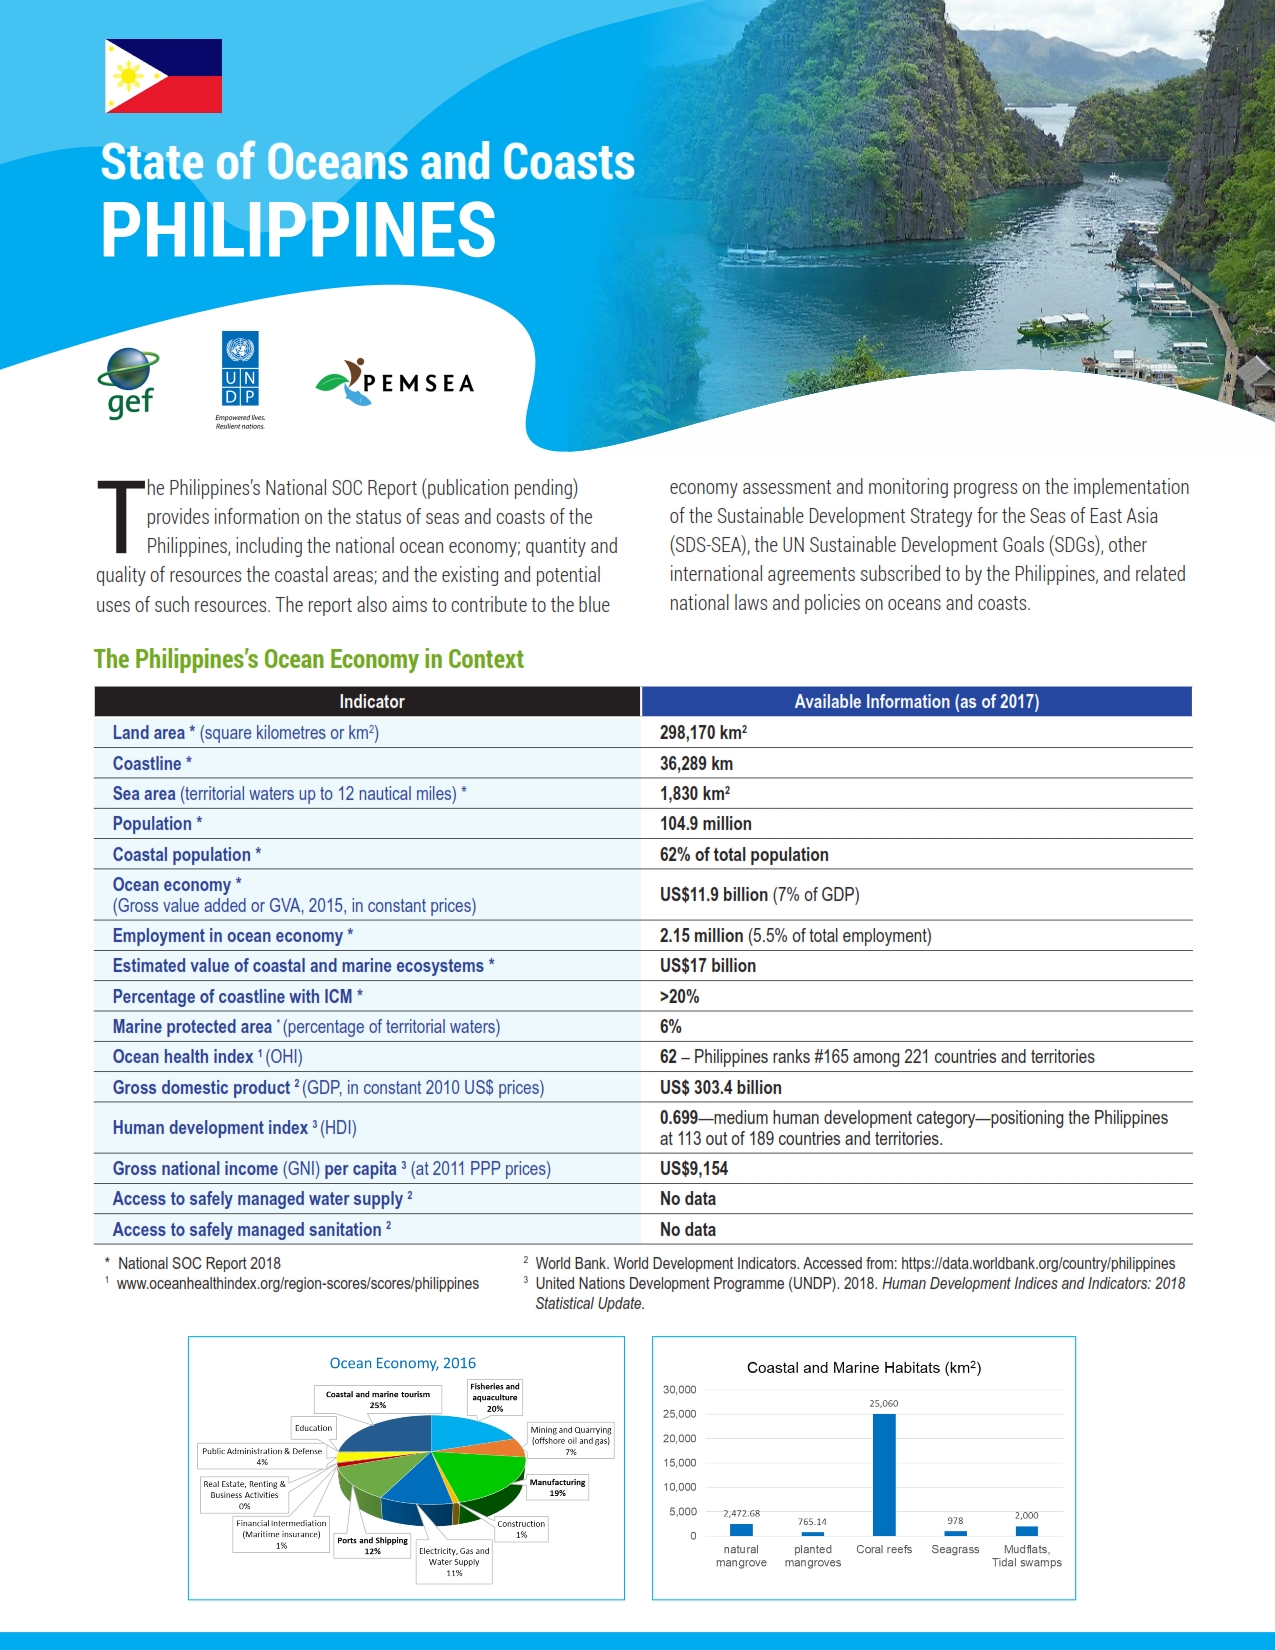 State of Oceans and Coasts of the Philippines